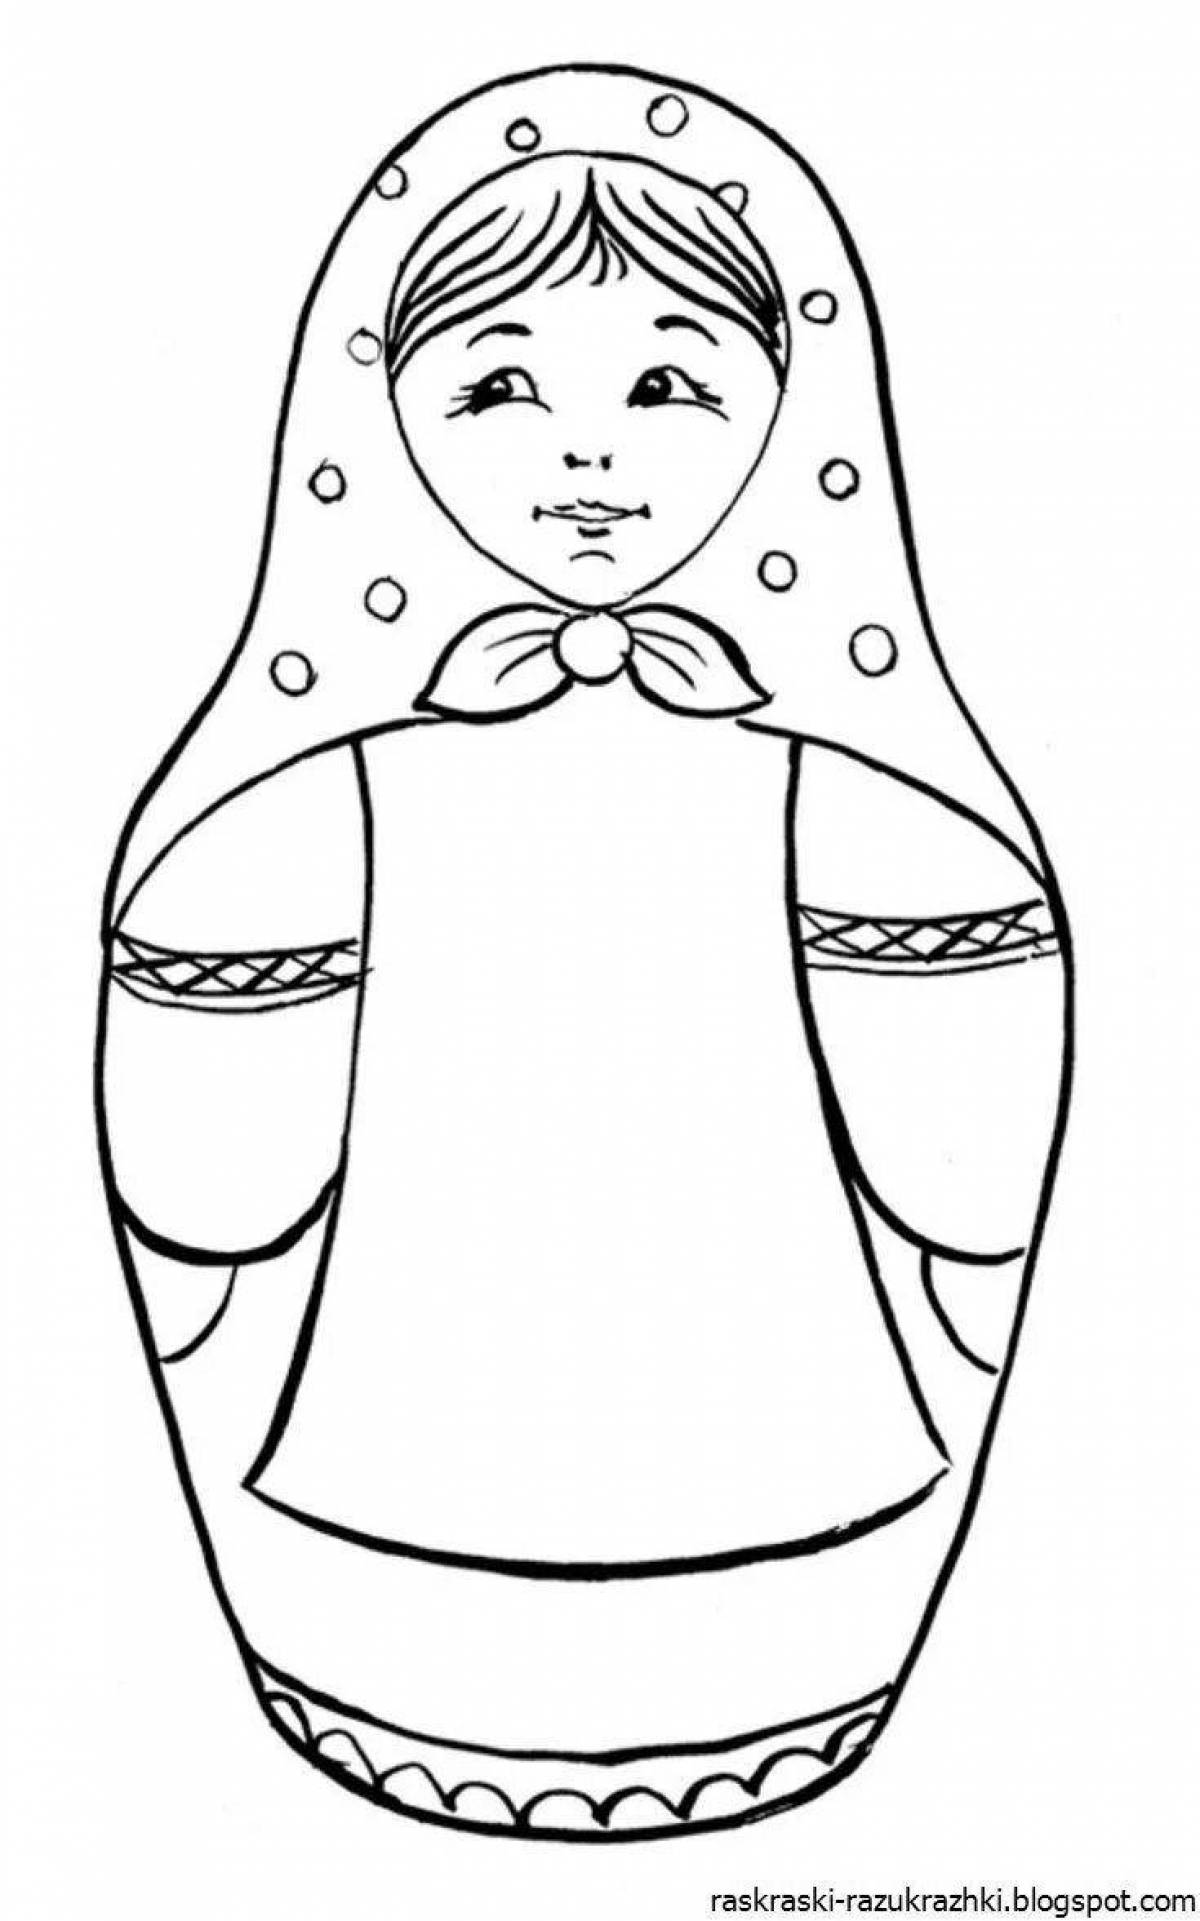 Delightful matryoshka coloring book for 3-4 year olds